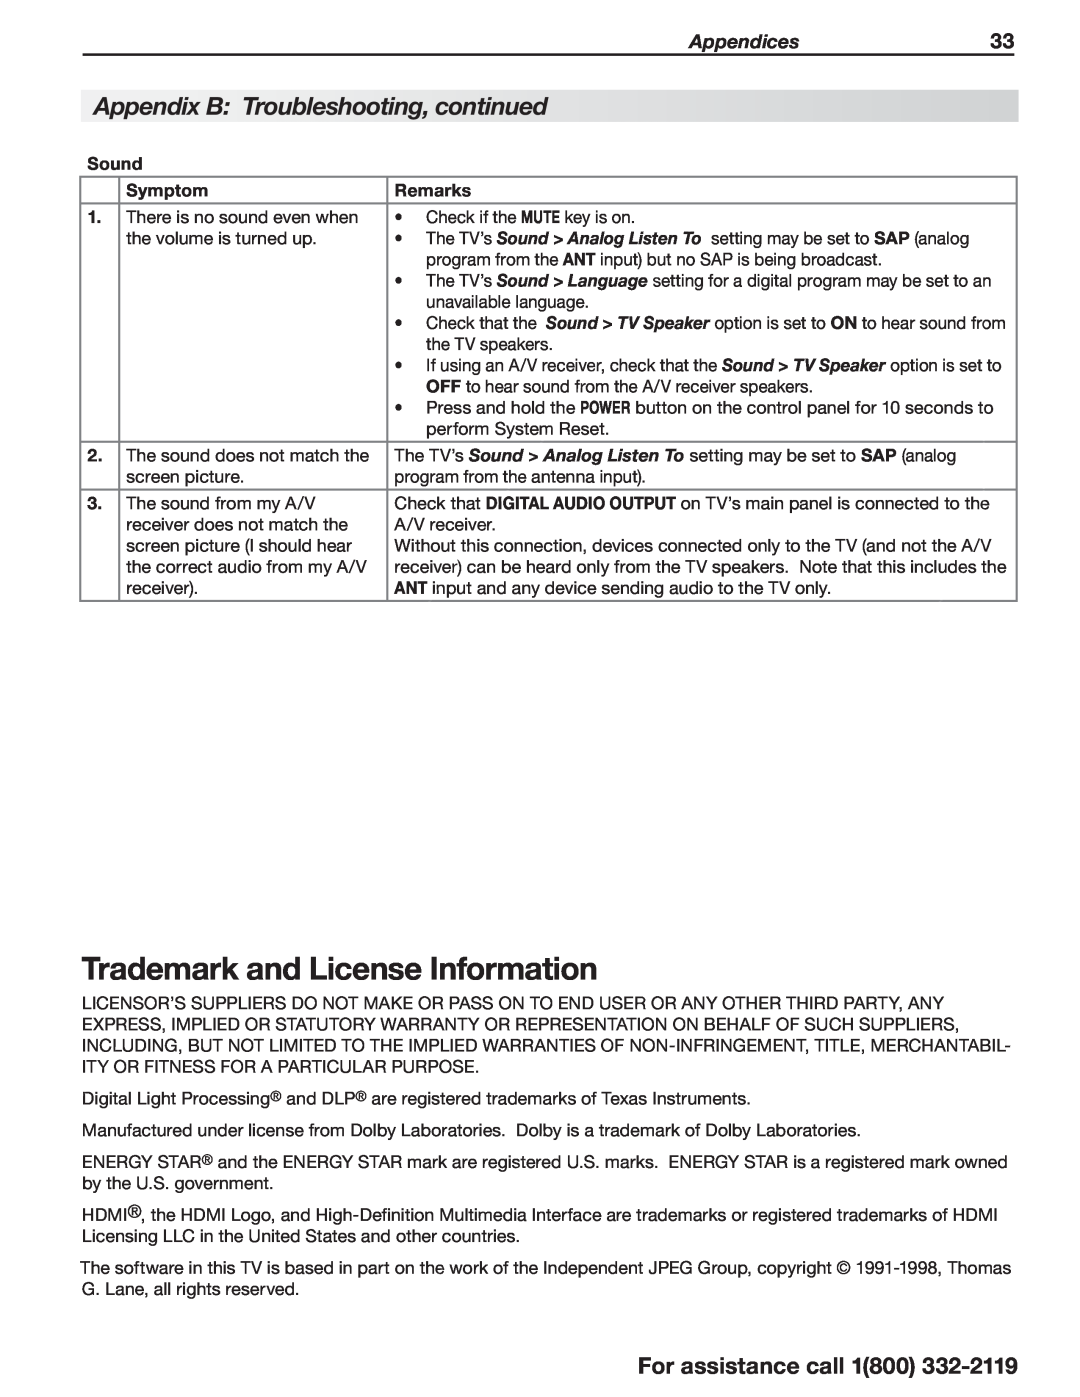 Mitsumi electronic C10 SERIES Trademark and License Information, Appendix B Troubleshooting, continued, Appendices, Sound 